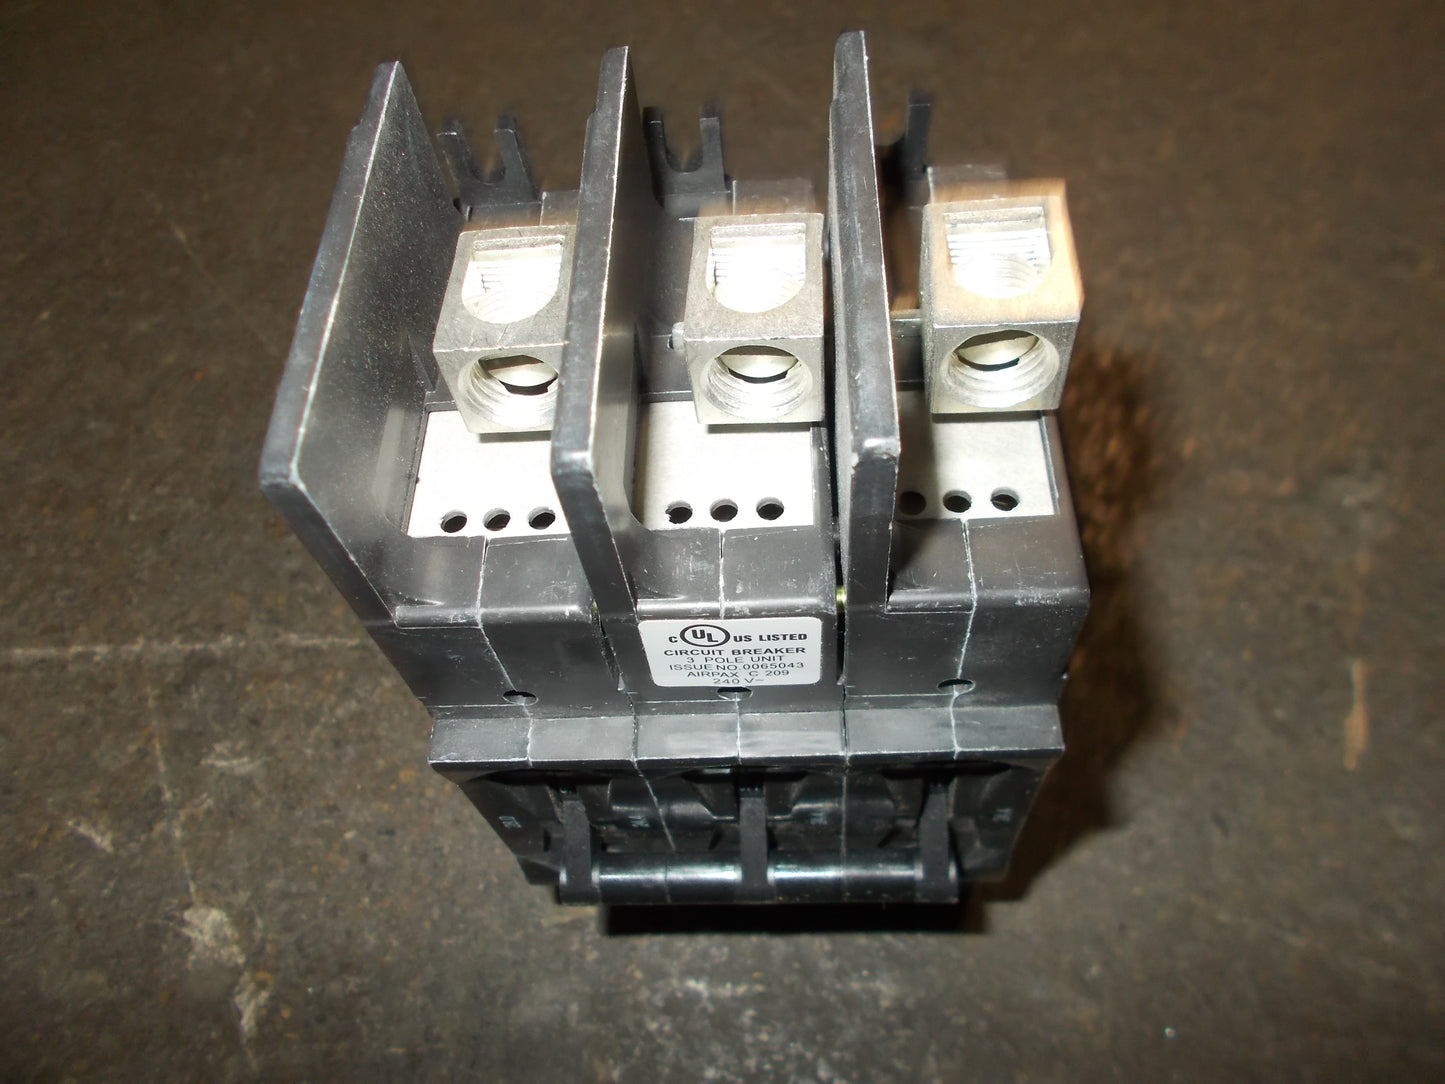 3 POLE 24.4 AMP "209 MULTI-POLE" SERIES HYDRAULIC MAGNETIC CIRCUIT BREAKER PROTECTOR 240/50-60/1 OR 3